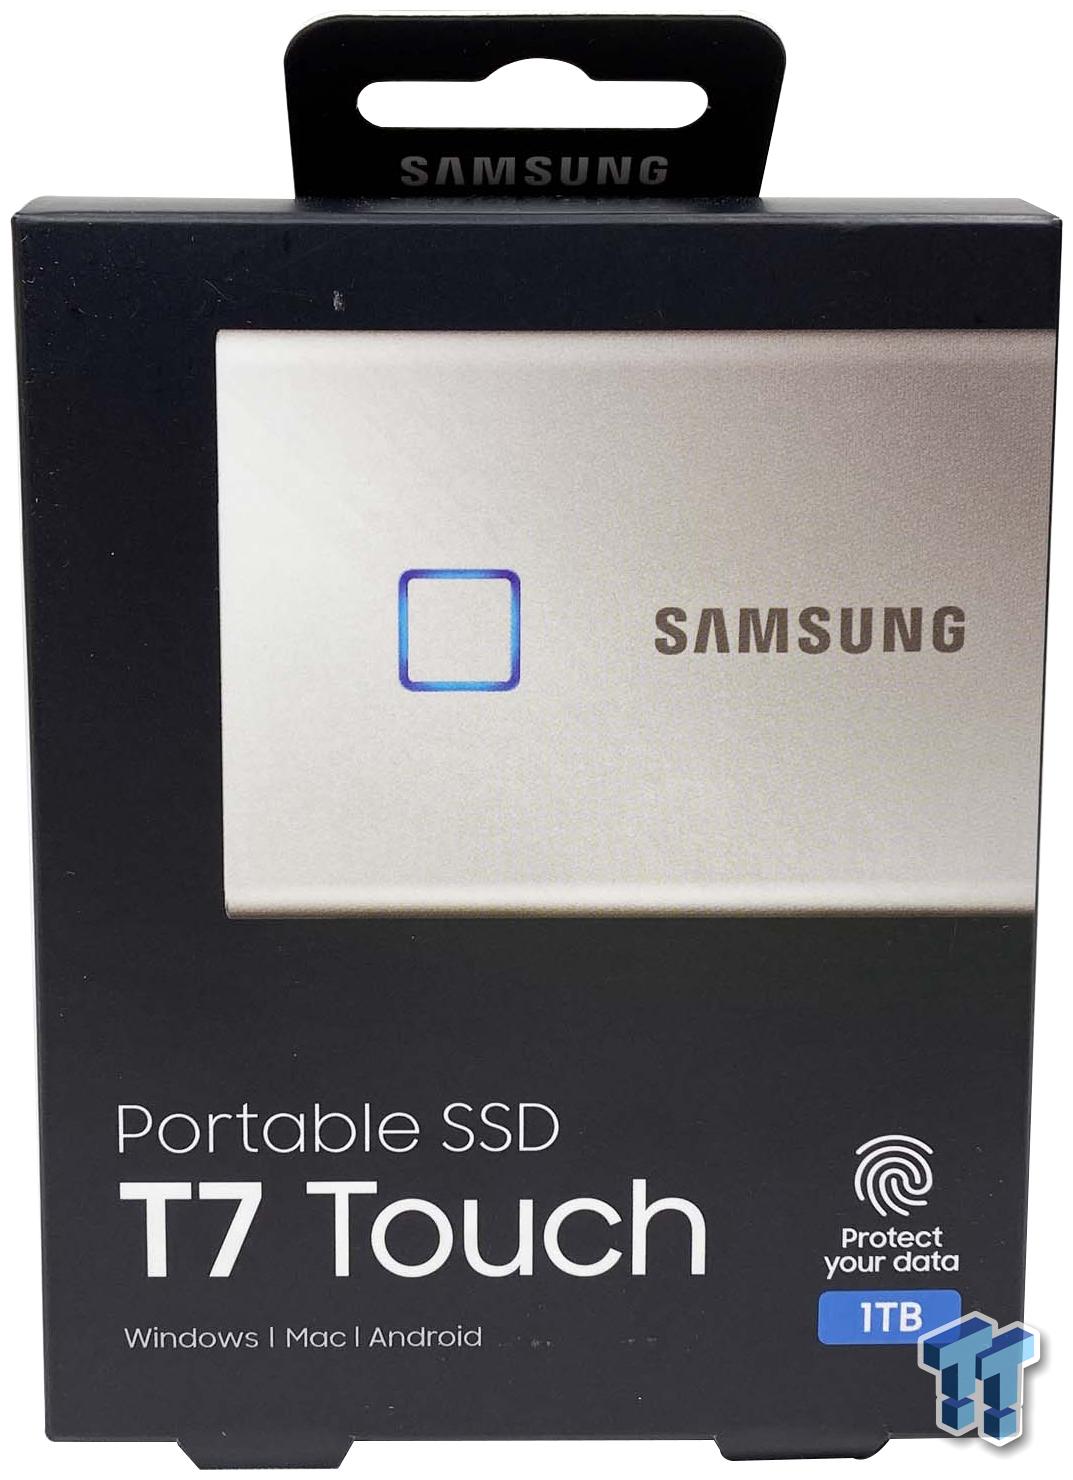 Samsung T7 Touch 1TB Portable SSD Review